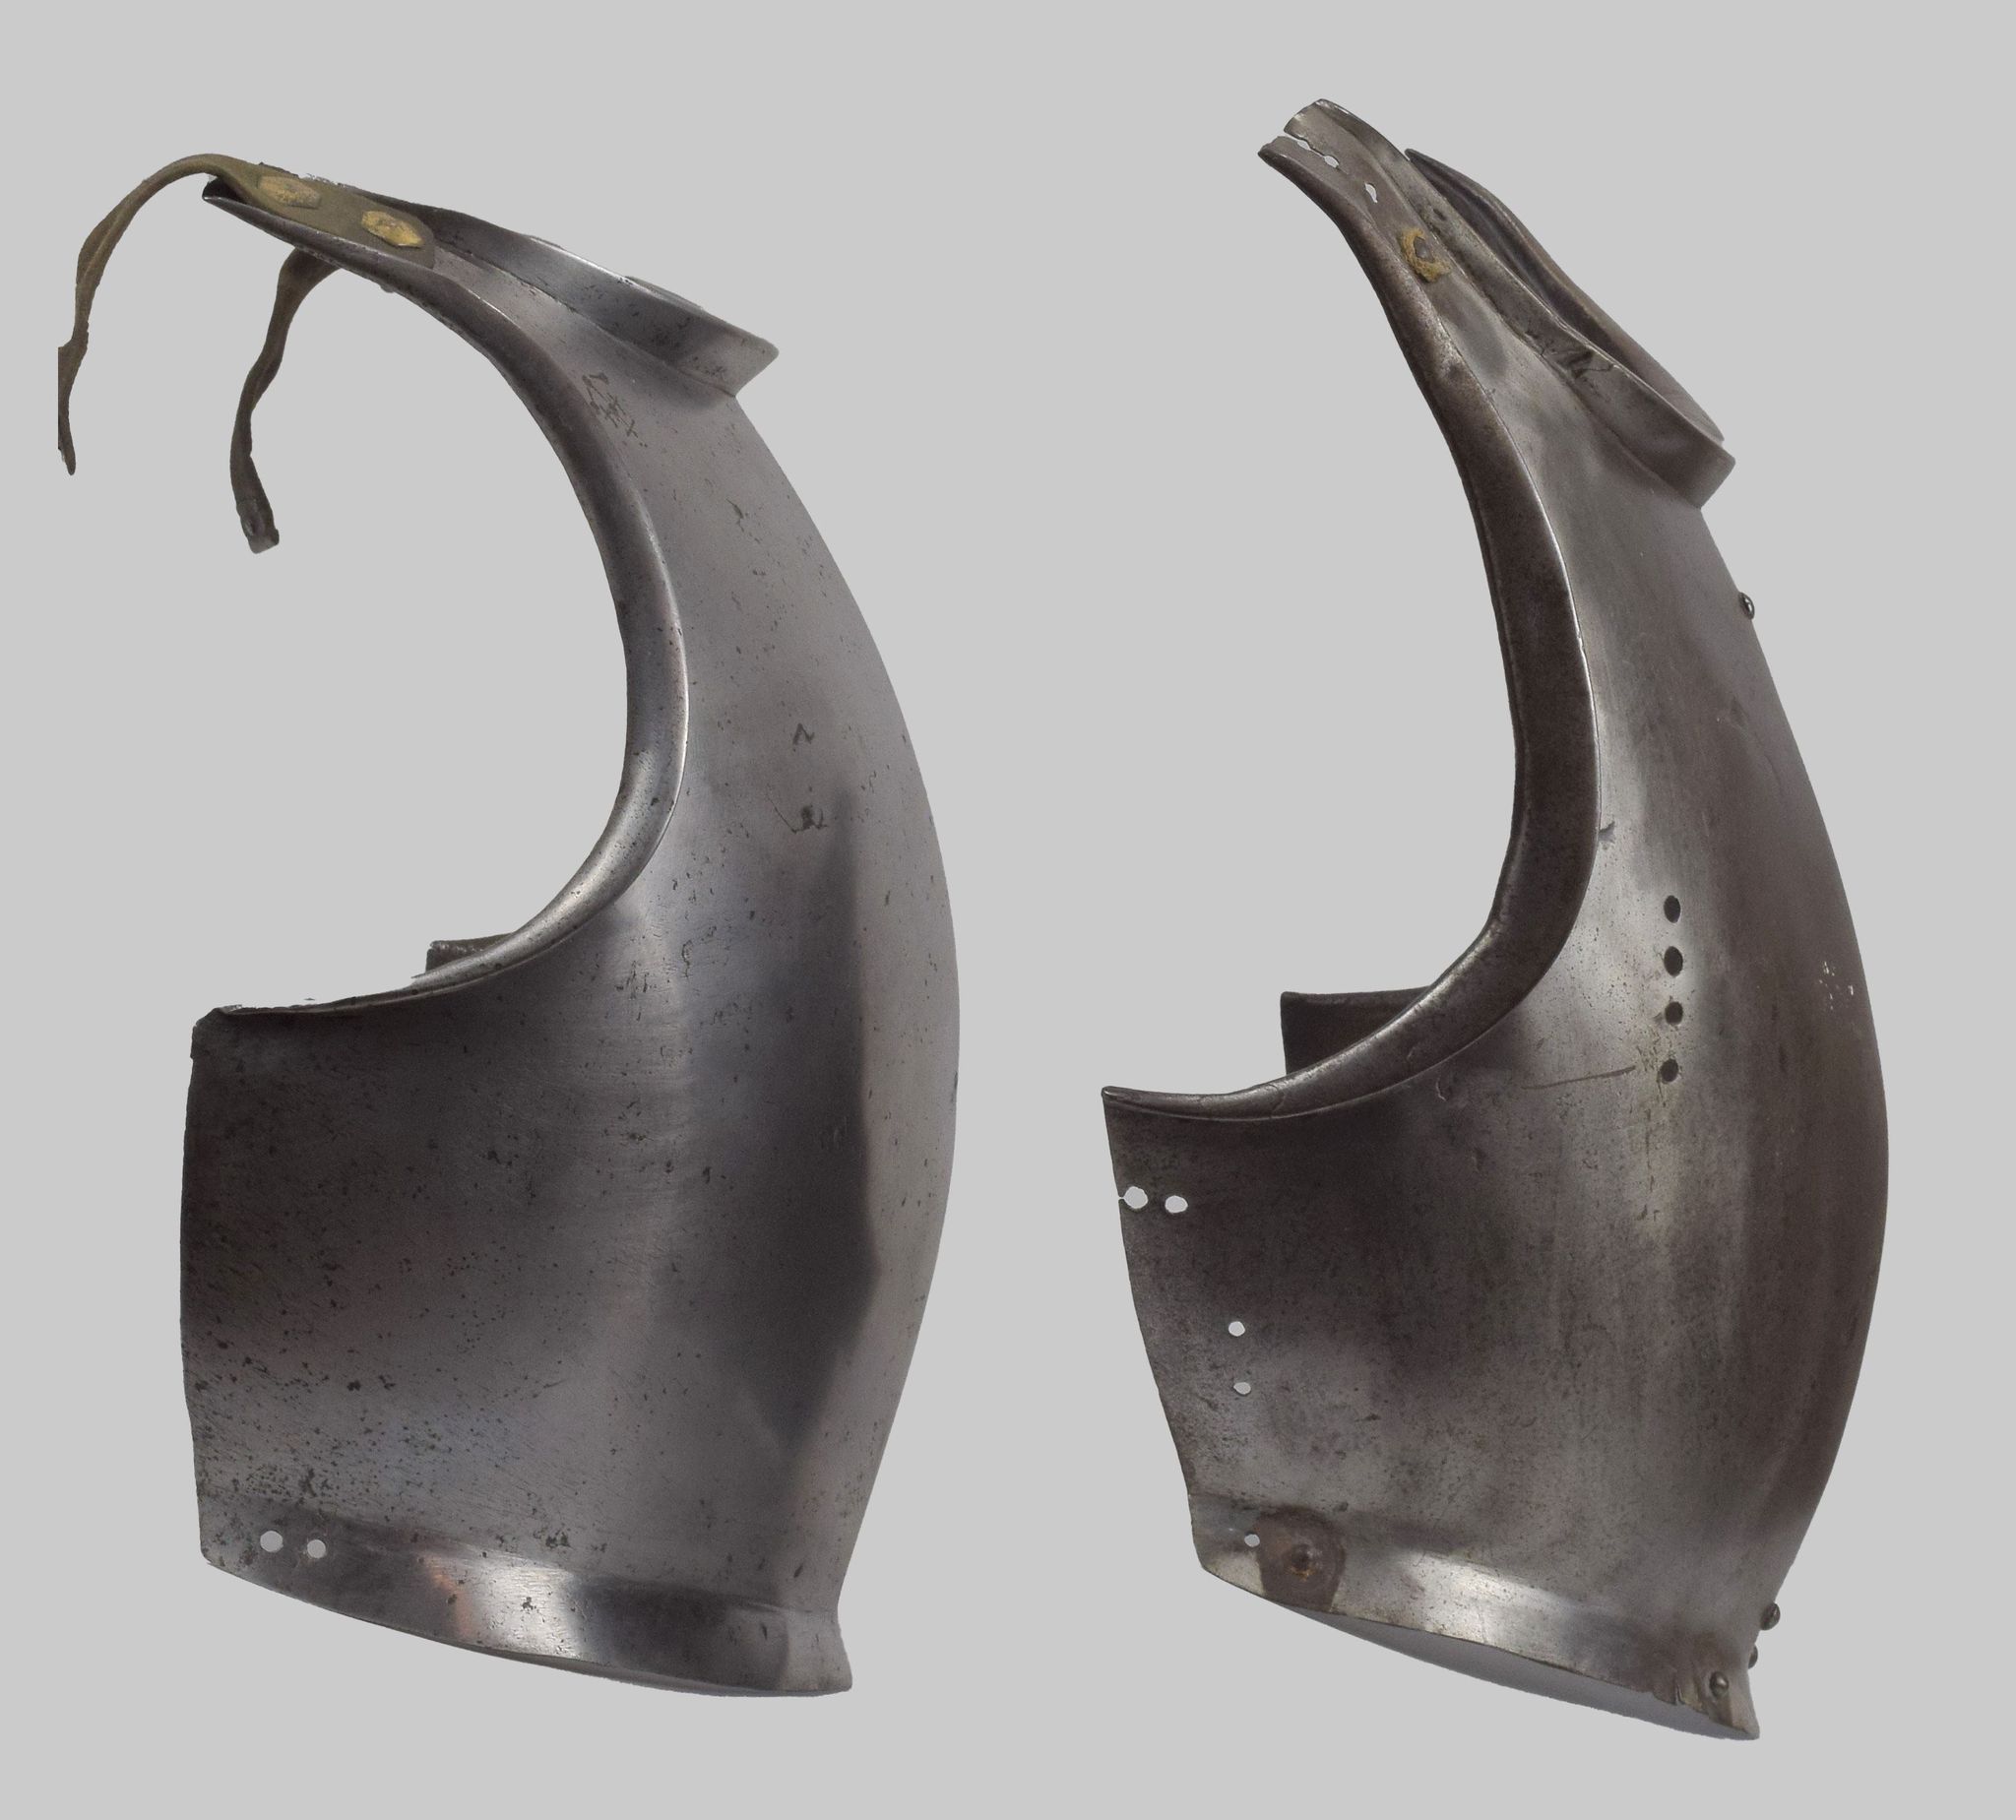 Italian or Flemish Breastplate - A-321-A-66-profiles-side-by-side-bigger